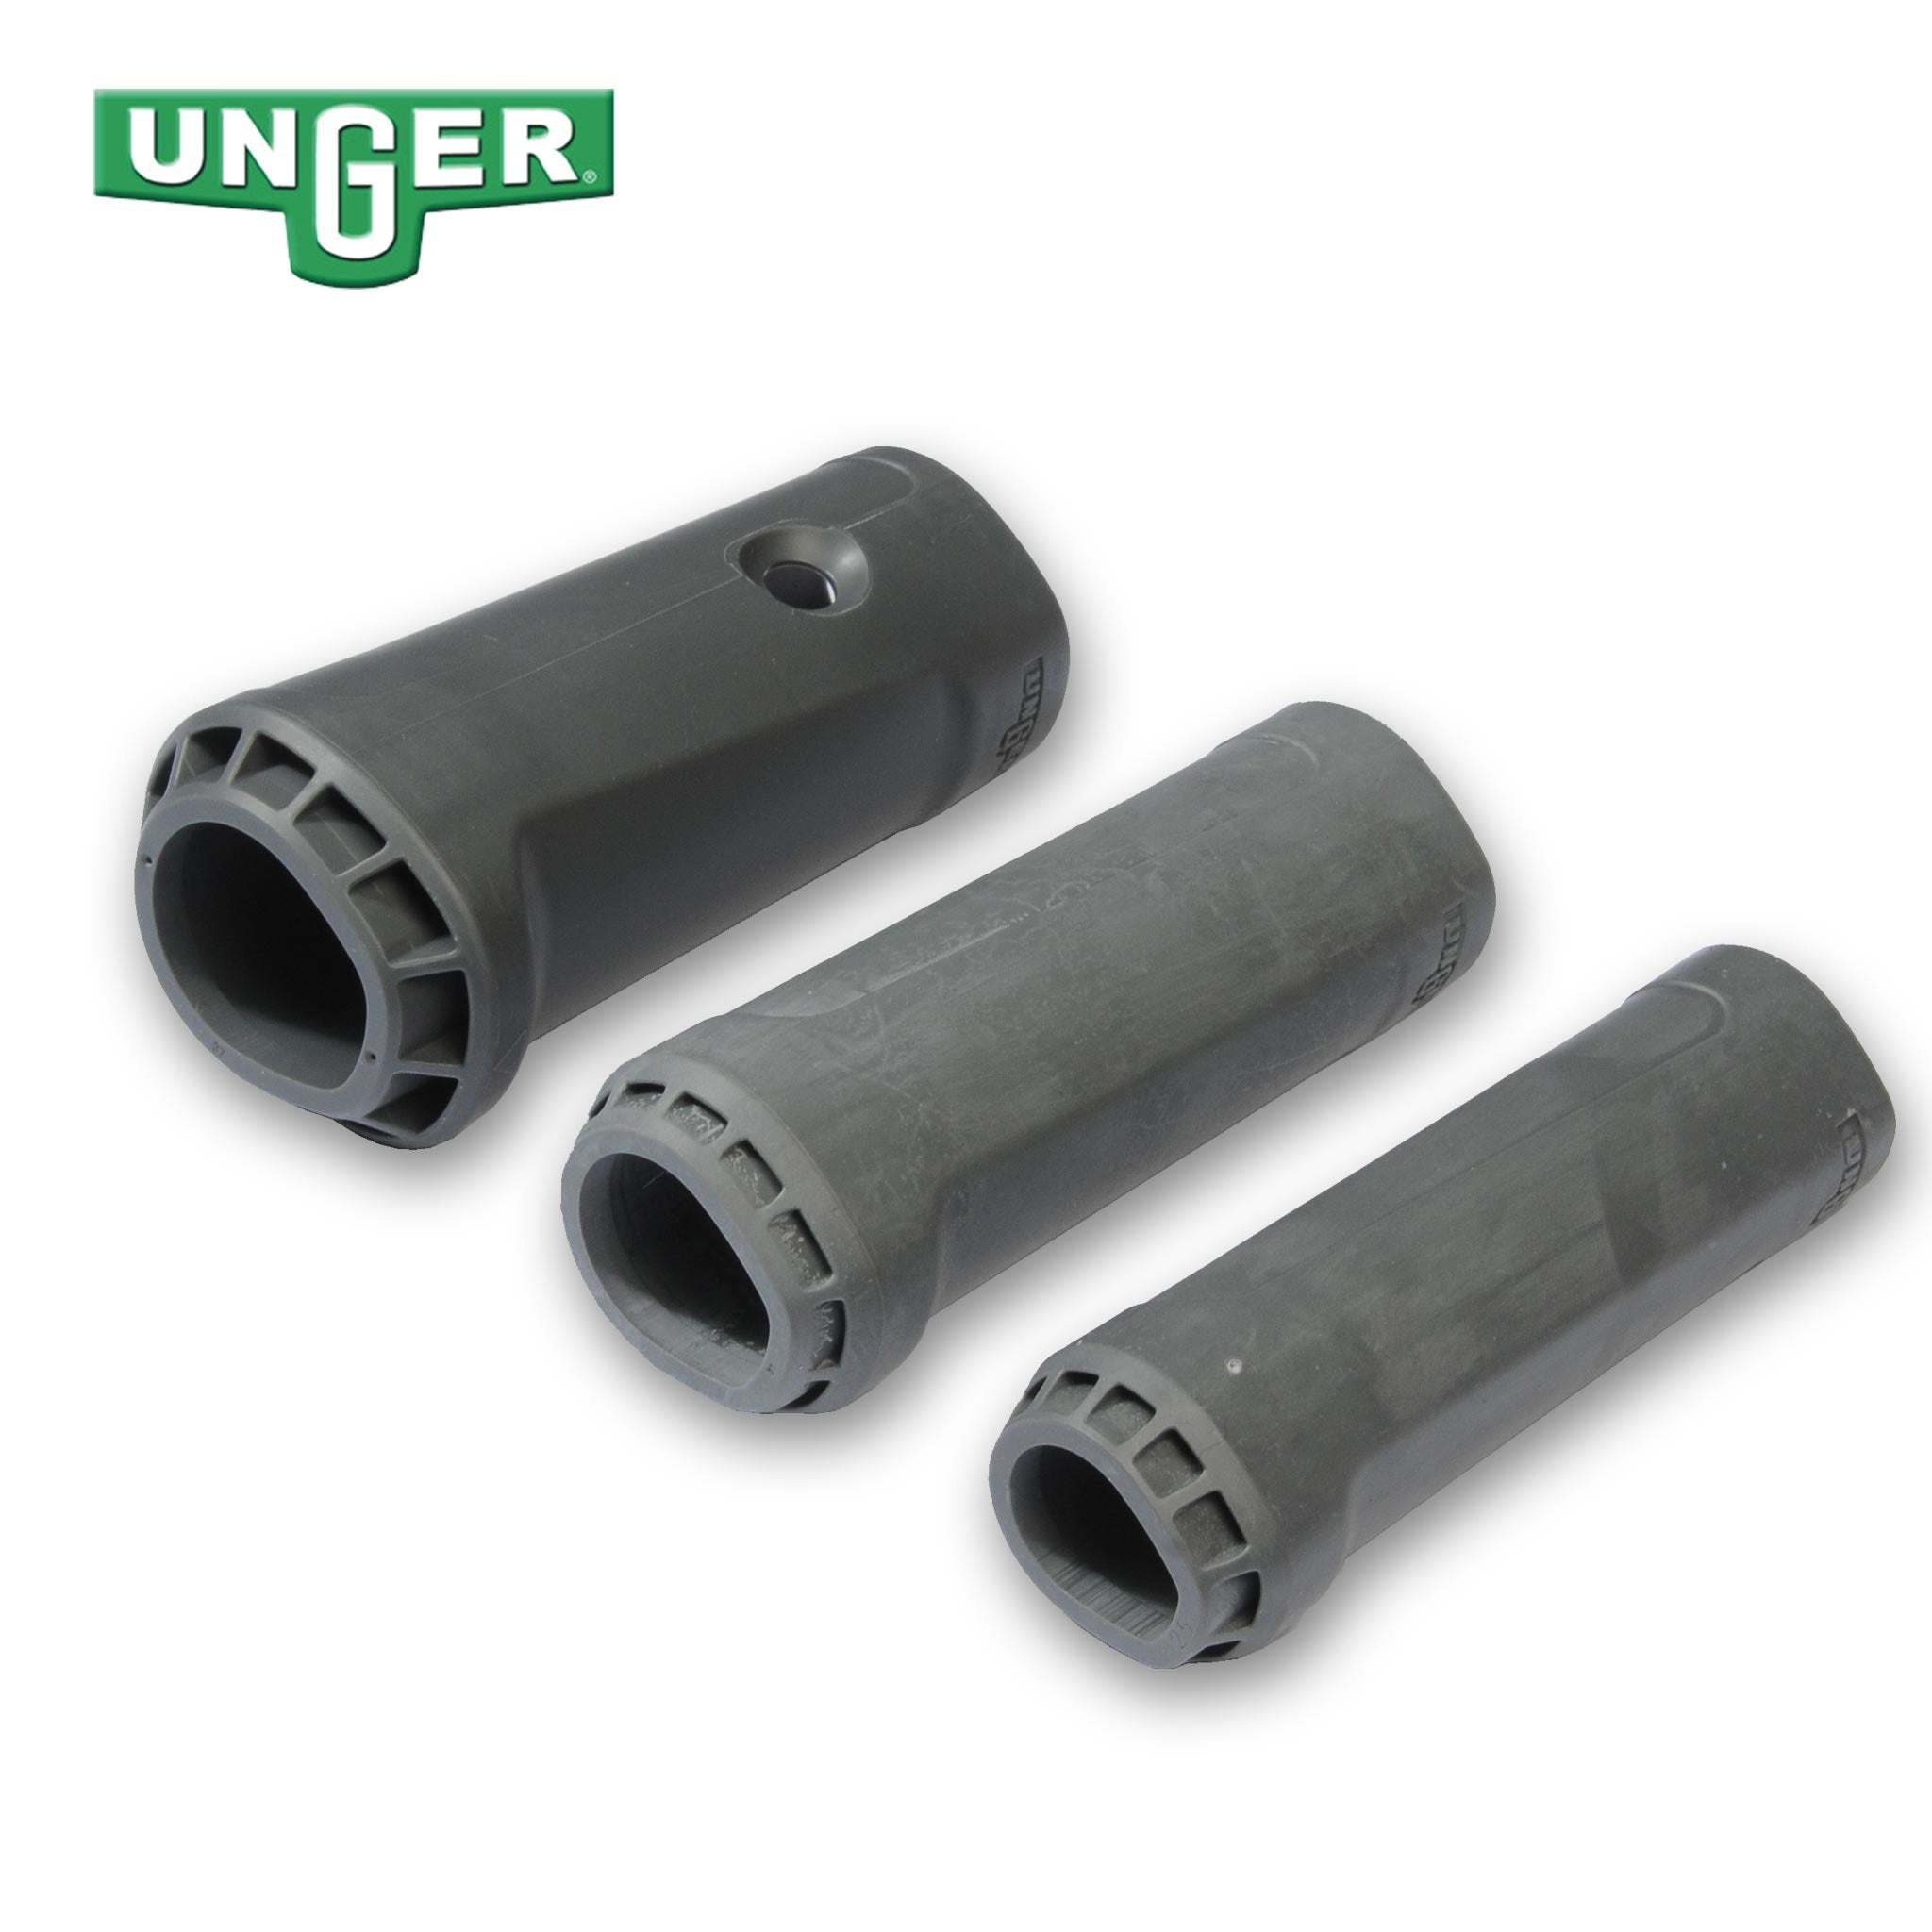 Unger nLite Replacement Grips for Oval Poles